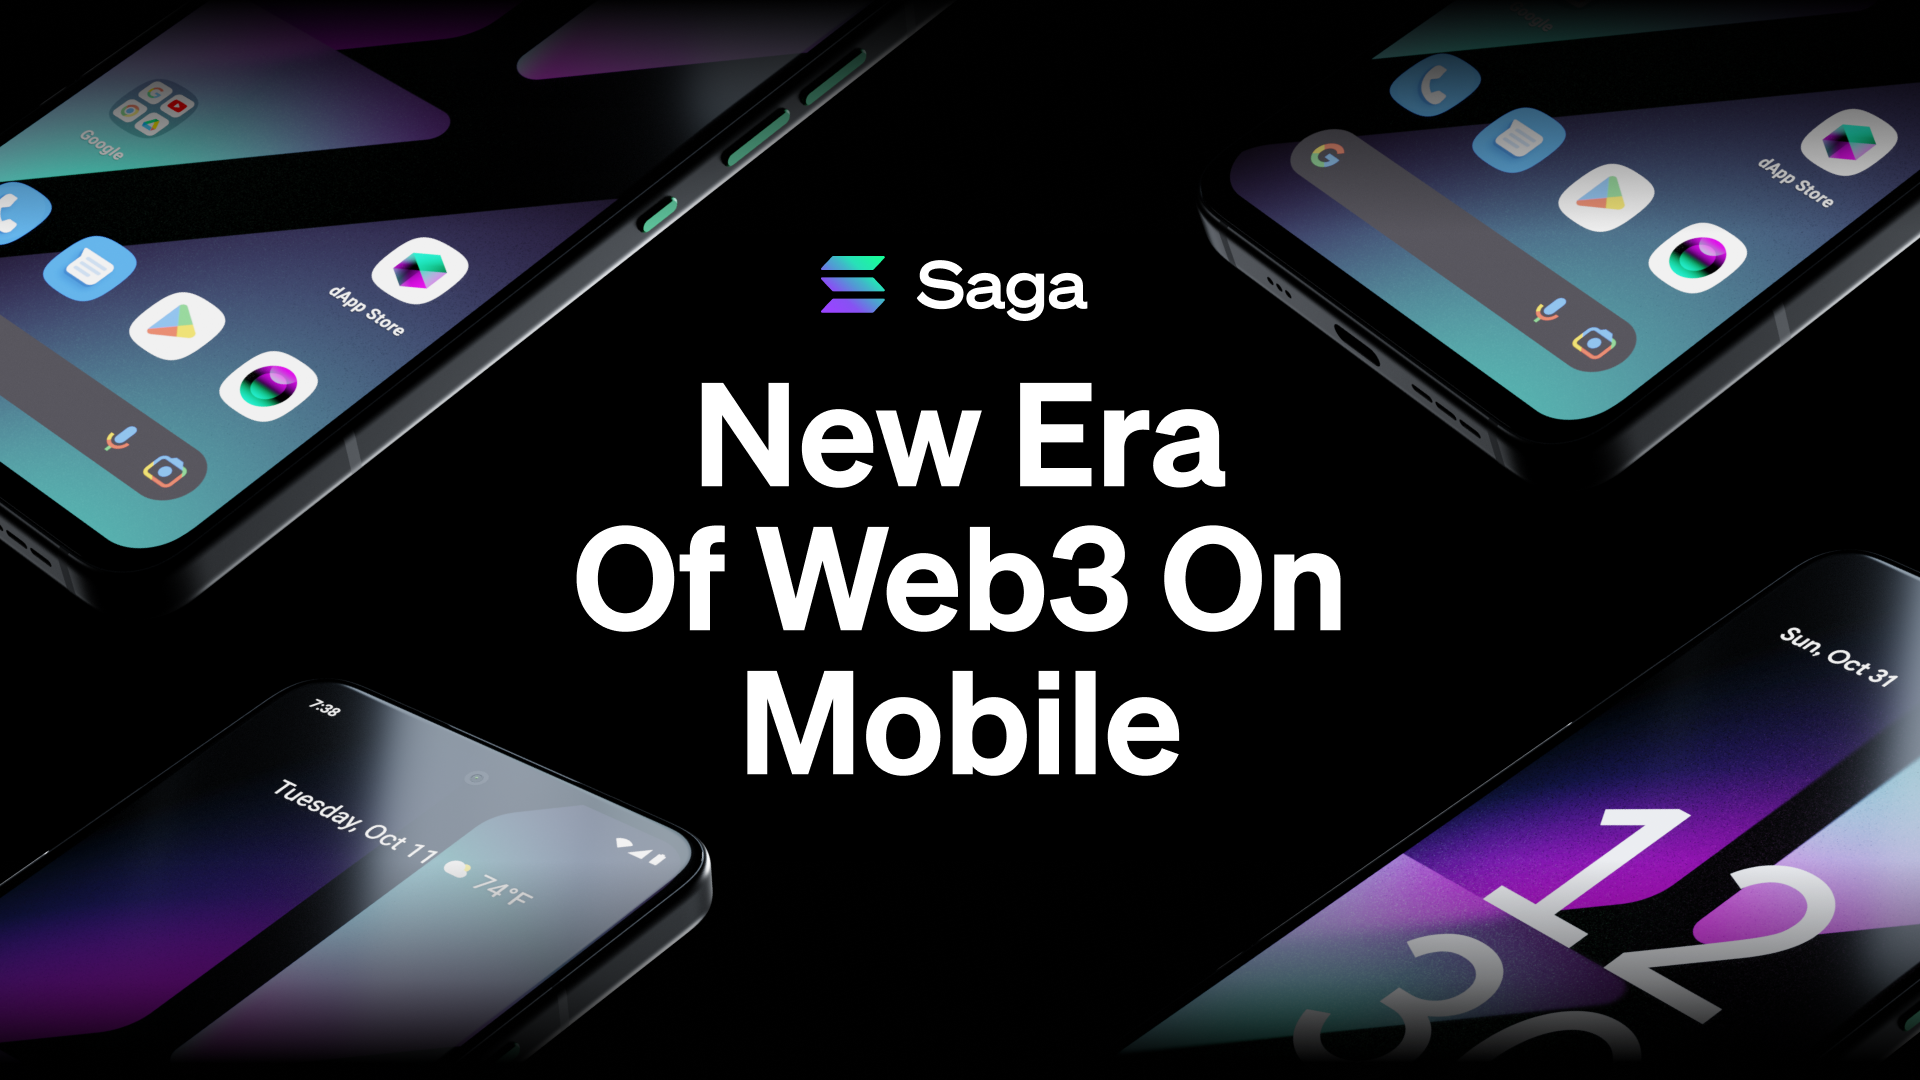 Saga now available, ushers in new mobile web3 era